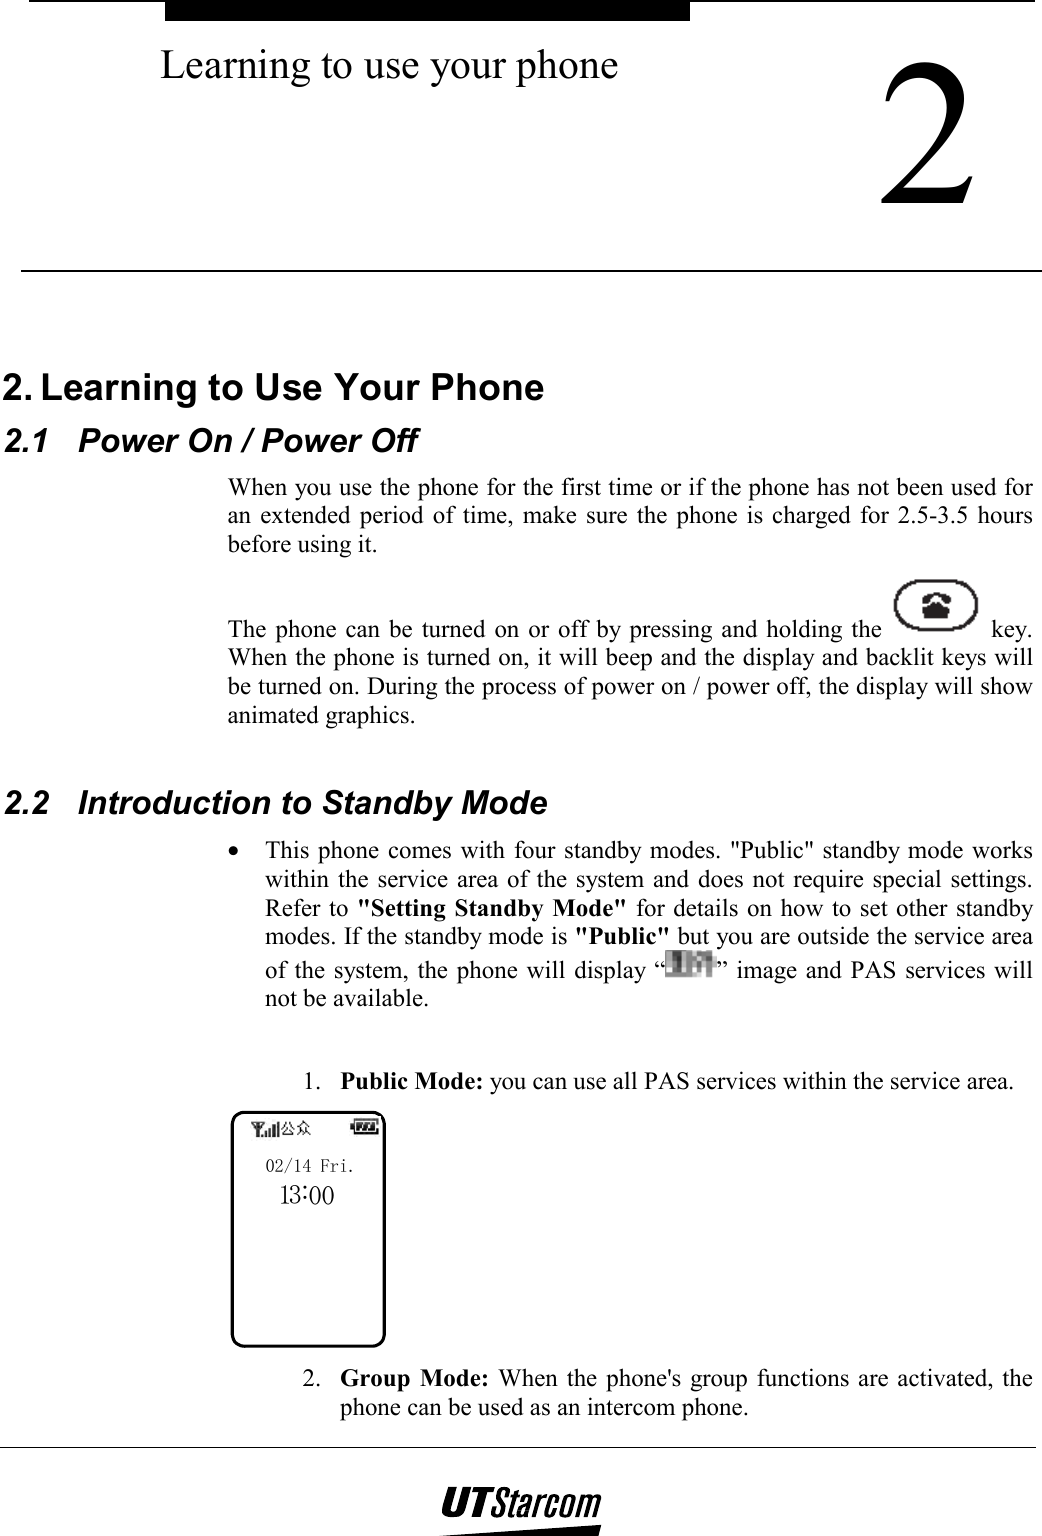  2 Learning to use your phone    2. Learning to Use Your Phone 2.1  Power On / Power Off When you use the phone for the first time or if the phone has not been used for an extended period of time, make sure the phone is charged for 2.5-3.5 hours before using it. The phone can be turned on or off by pressing and holding the   key. When the phone is turned on, it will beep and the display and backlit keys will be turned on. During the process of power on / power off, the display will show animated graphics.  2.2  Introduction to Standby Mode •  This phone comes with four standby modes. &quot;Public&quot; standby mode works within the service area of the system and does not require special settings. Refer to &quot;Setting Standby Mode&quot; for details on how to set other standby modes. If the standby mode is &quot;Public&quot; but you are outside the service area of the system, the phone will display “ ” image and PAS services will not be available.  1.  Public Mode: you can use all PAS services within the service area. 103:002/14 Fri. 2.  Group Mode: When the phone&apos;s group functions are activated, the phone can be used as an intercom phone. 